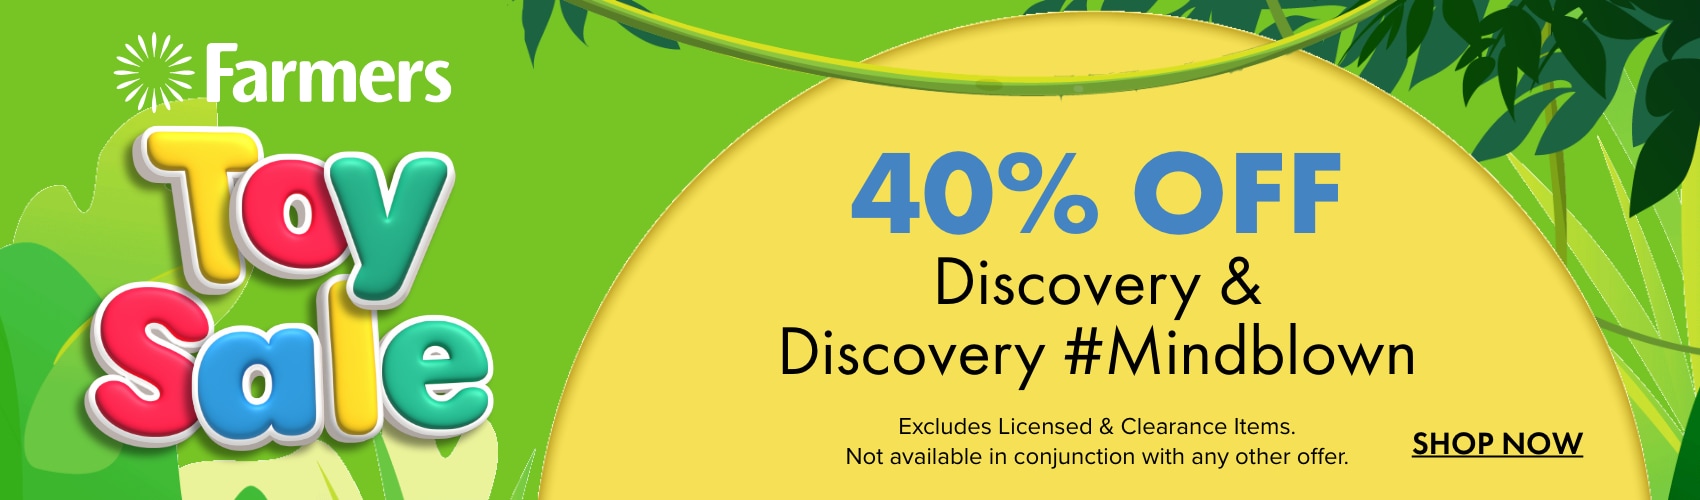 40% OFF Discovery & Discovery #Mindblown